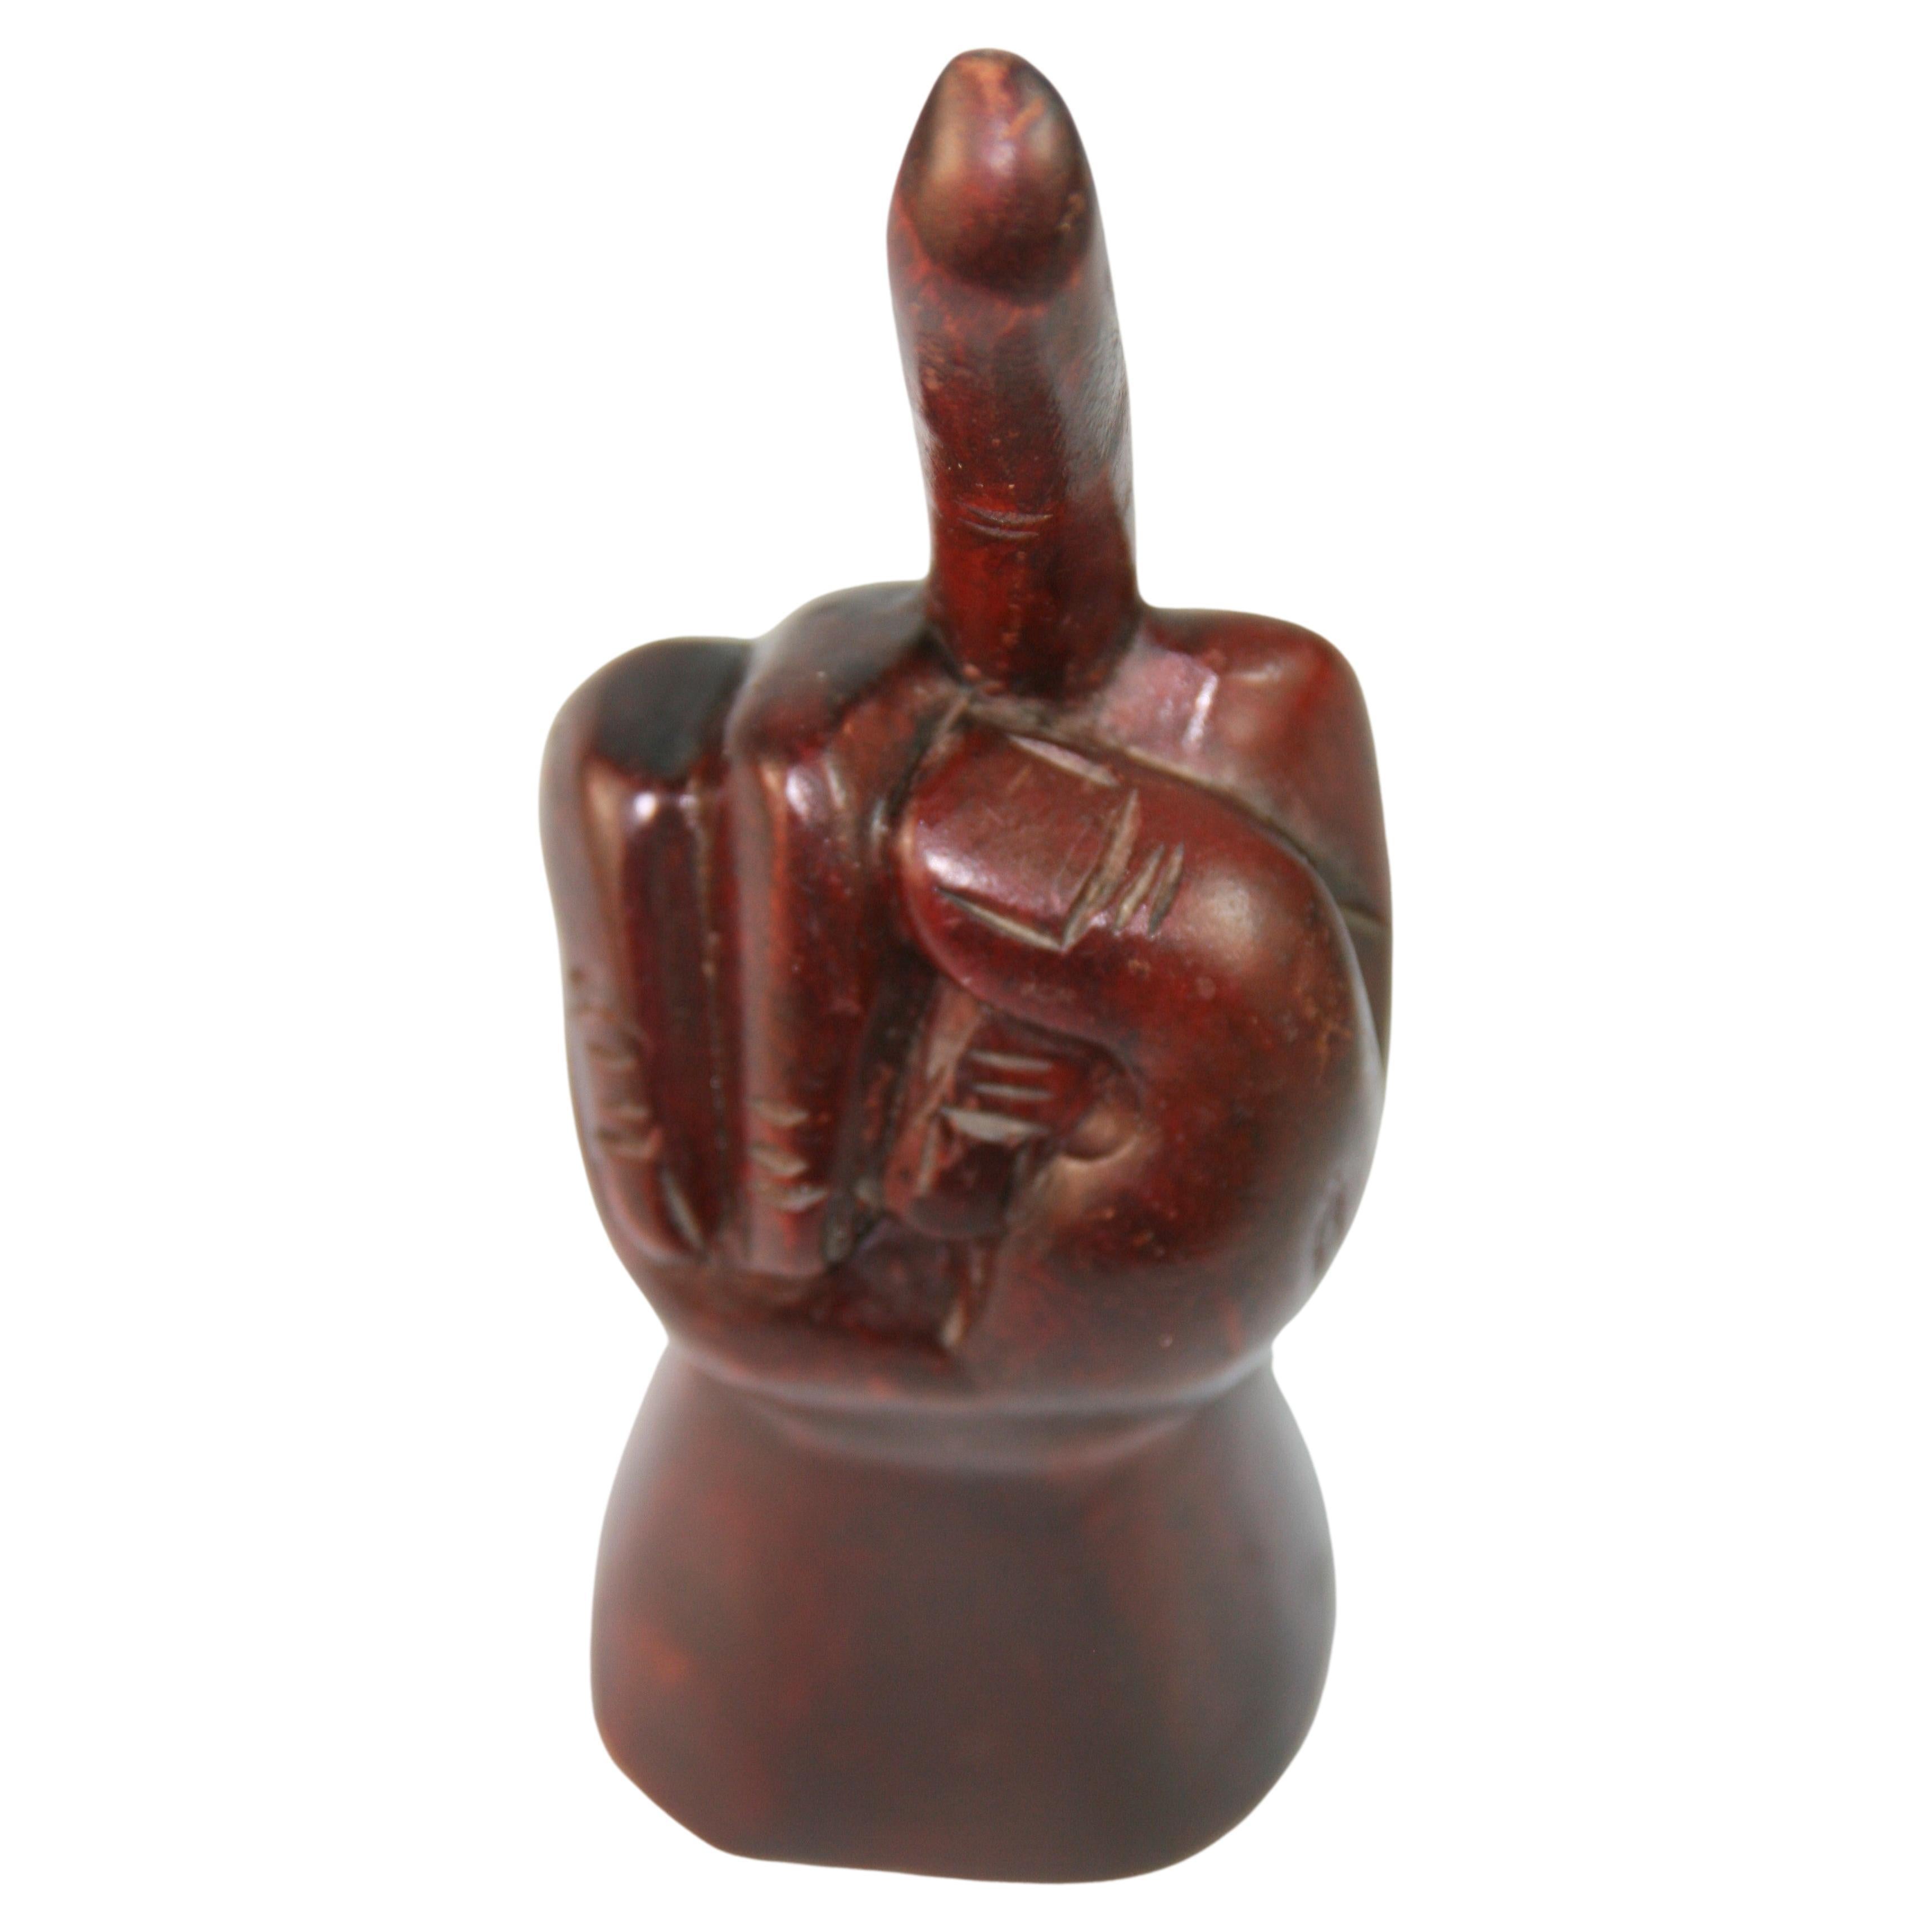 Neapolitan Italian Carved Wood Sculpture "The Finger" 1960's For Sale